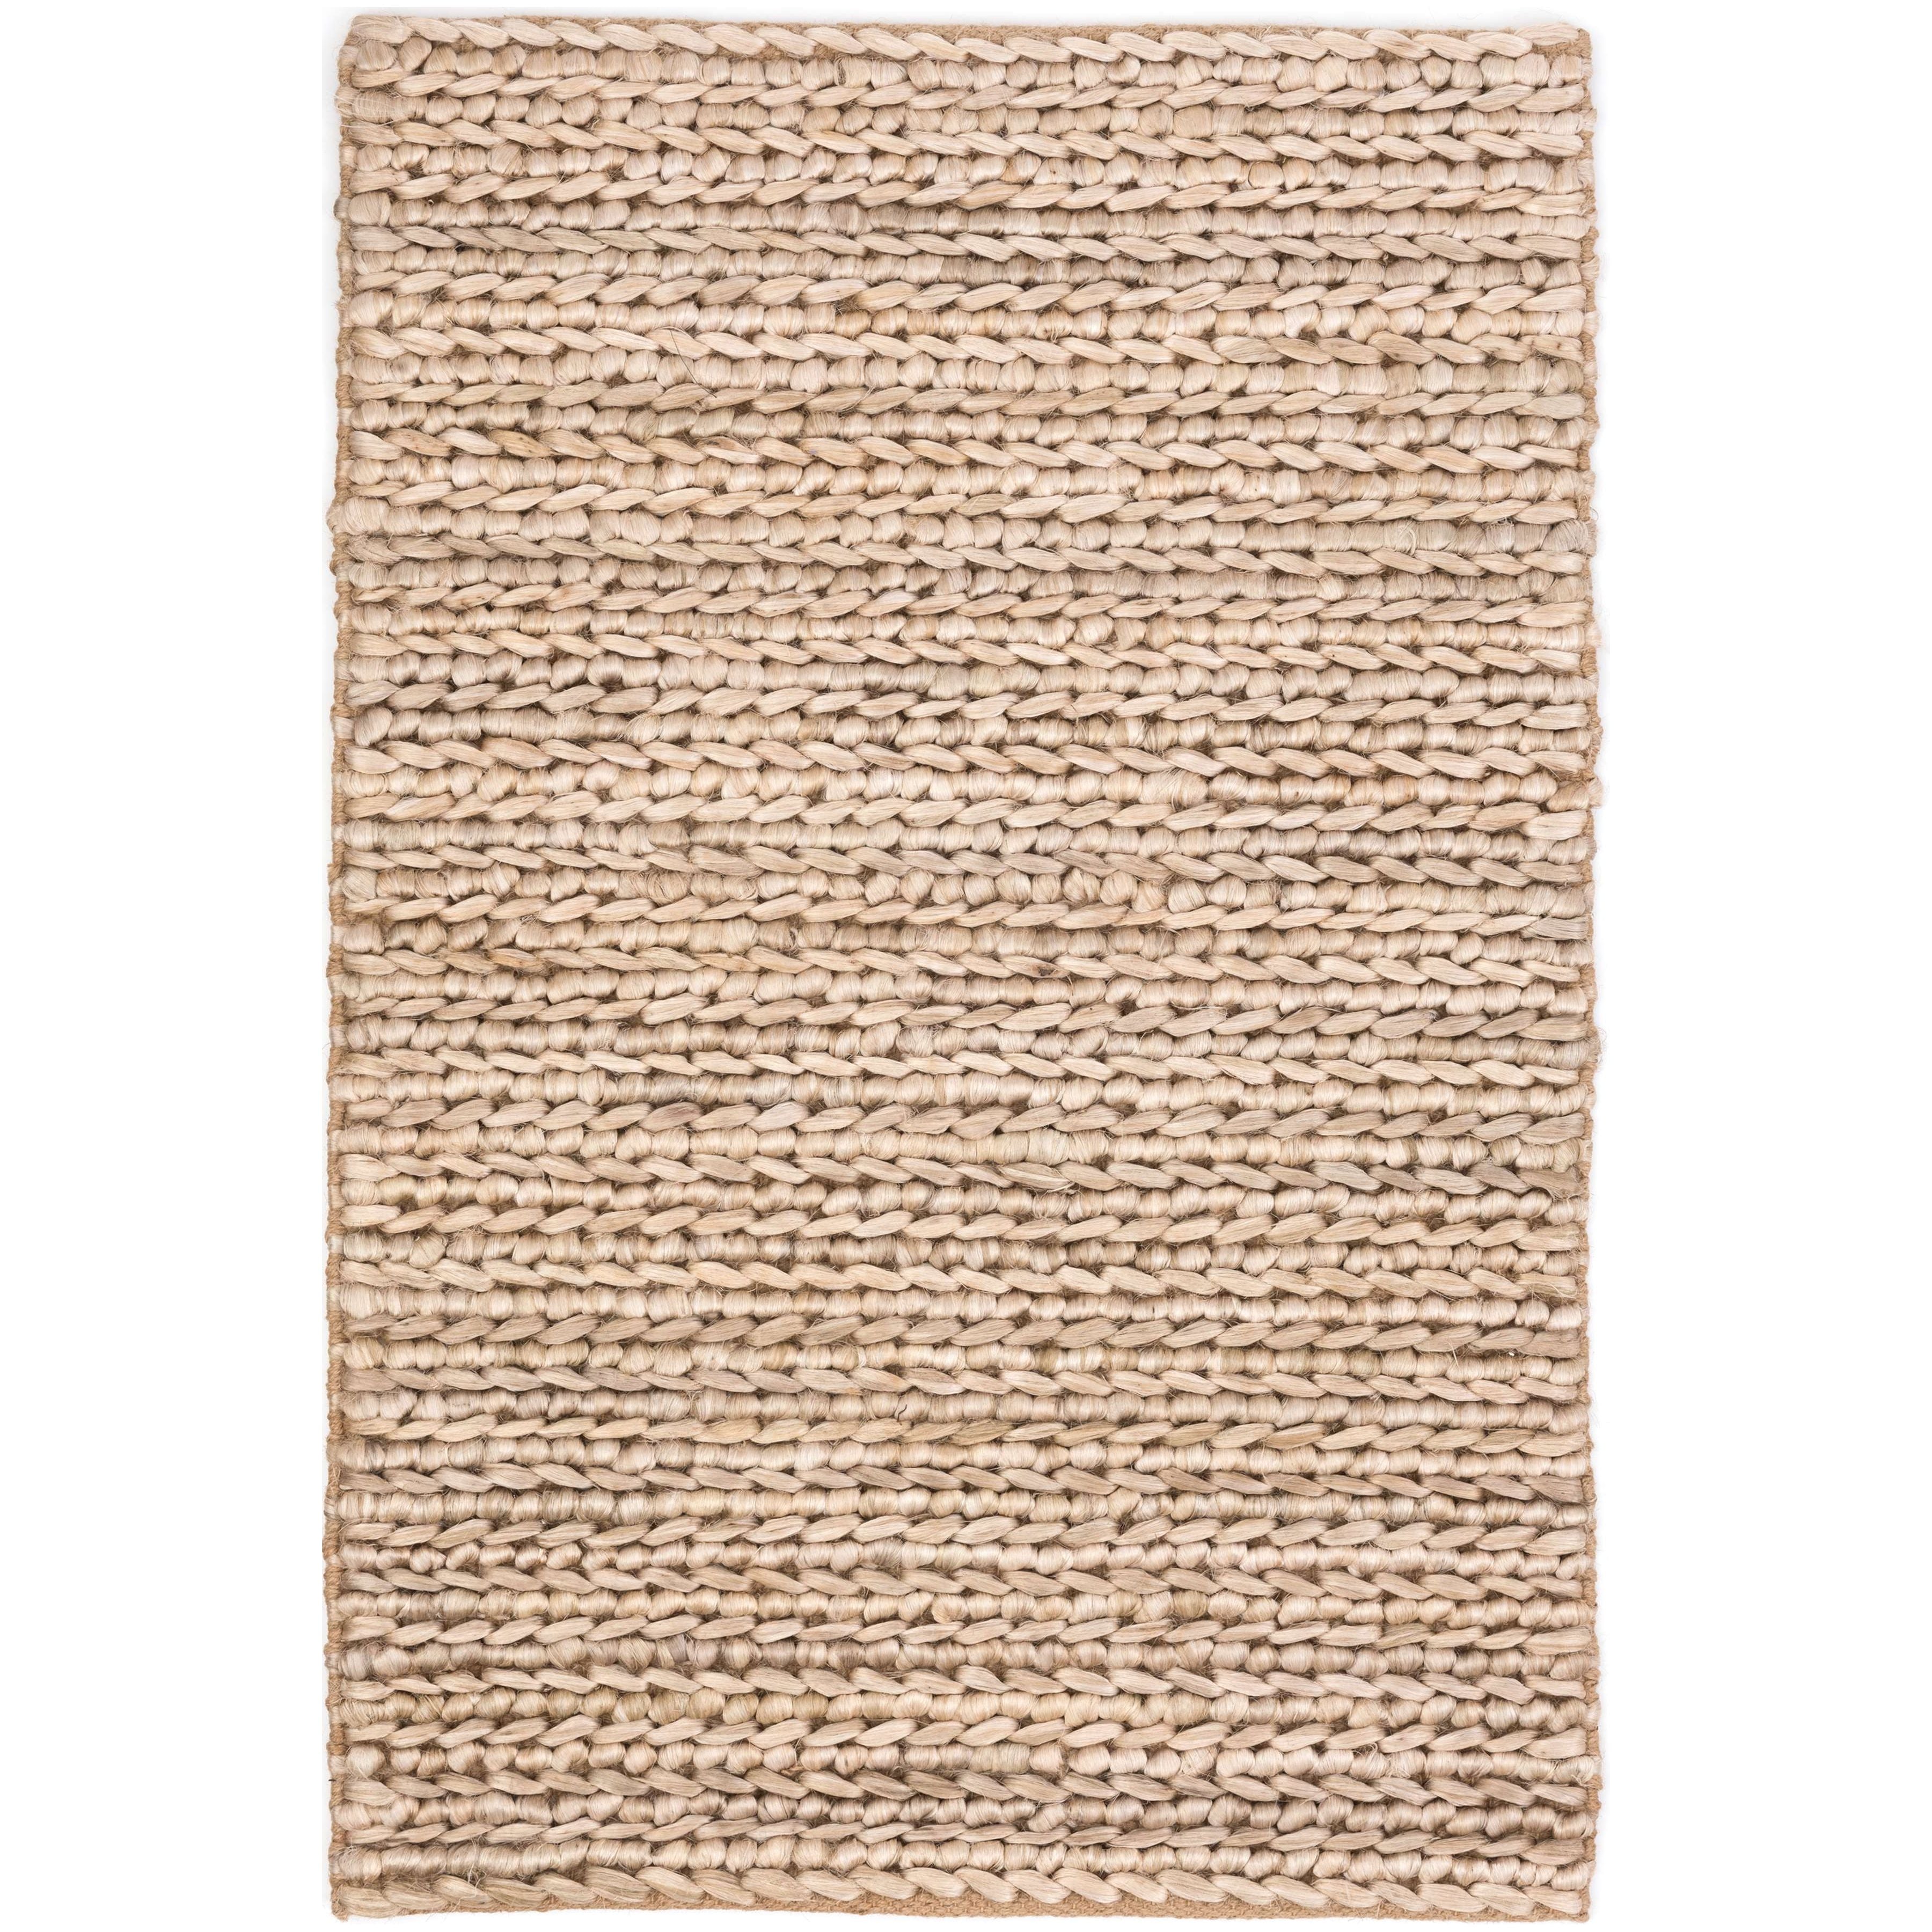 It doesn't get any easier than this all-natural jute stunner, with a unique hand-braided weave in a sun-bleached natural hue. Add the Annie Selke Dash & Albert Jute Bleached Oak handwoven rug to any space for a dose of organic chic. Amethyst Home provides interior design, new home construction design consulting, vintage area rugs, and lighting in the Kansas City metro area.